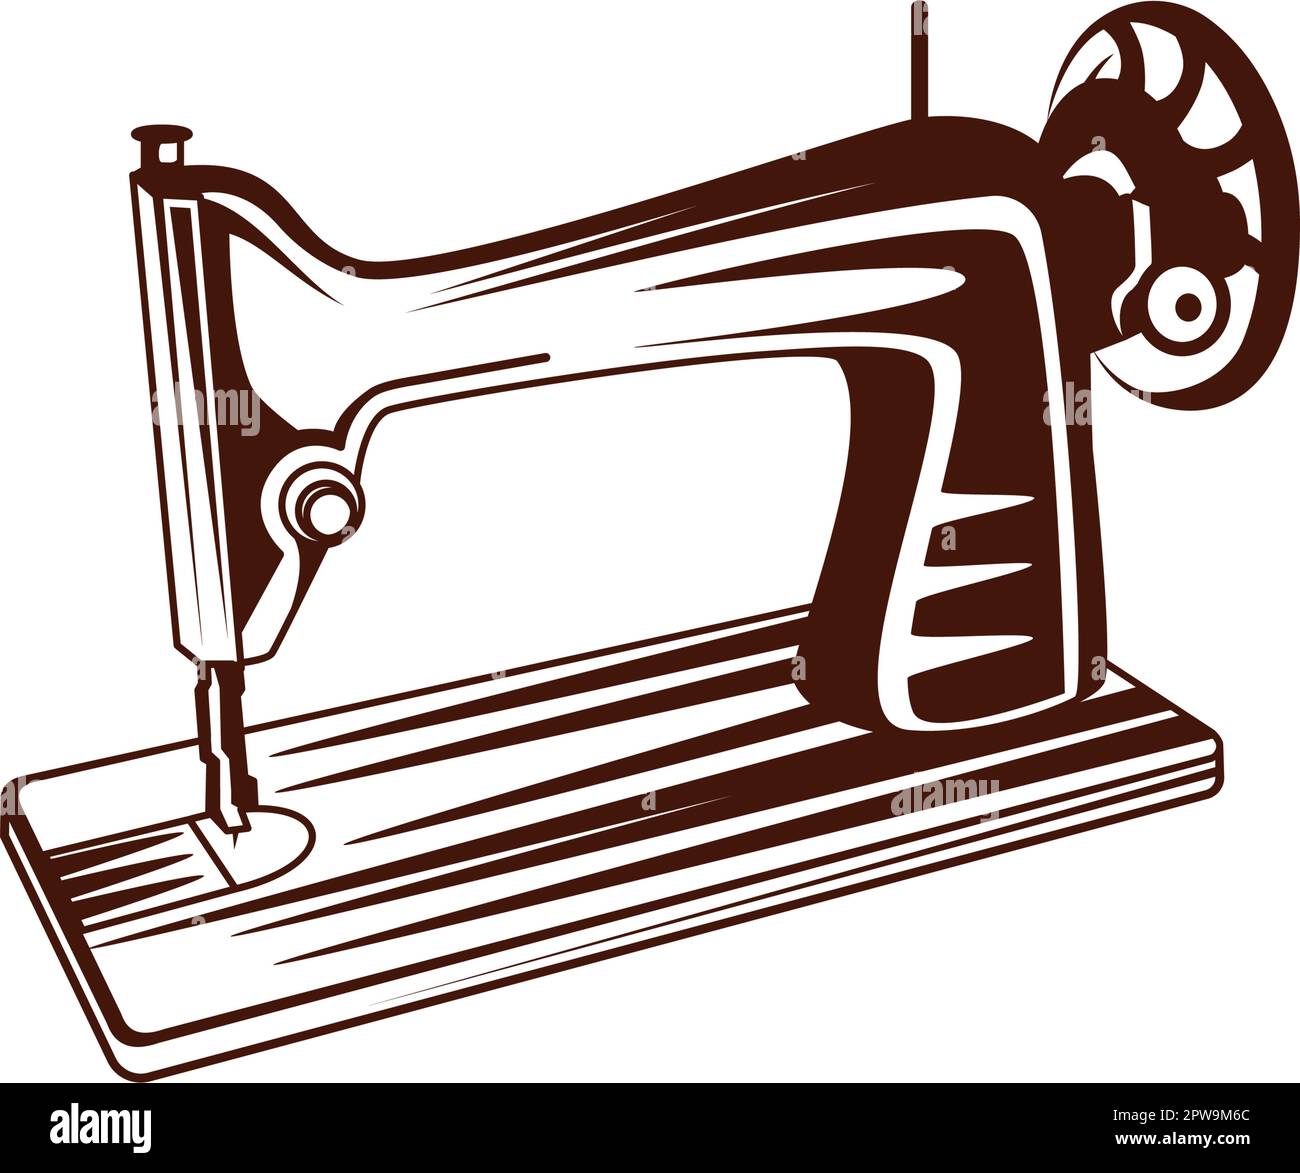 Vintage Sewing Machine Illustration with Silhouette Style Stock Vector